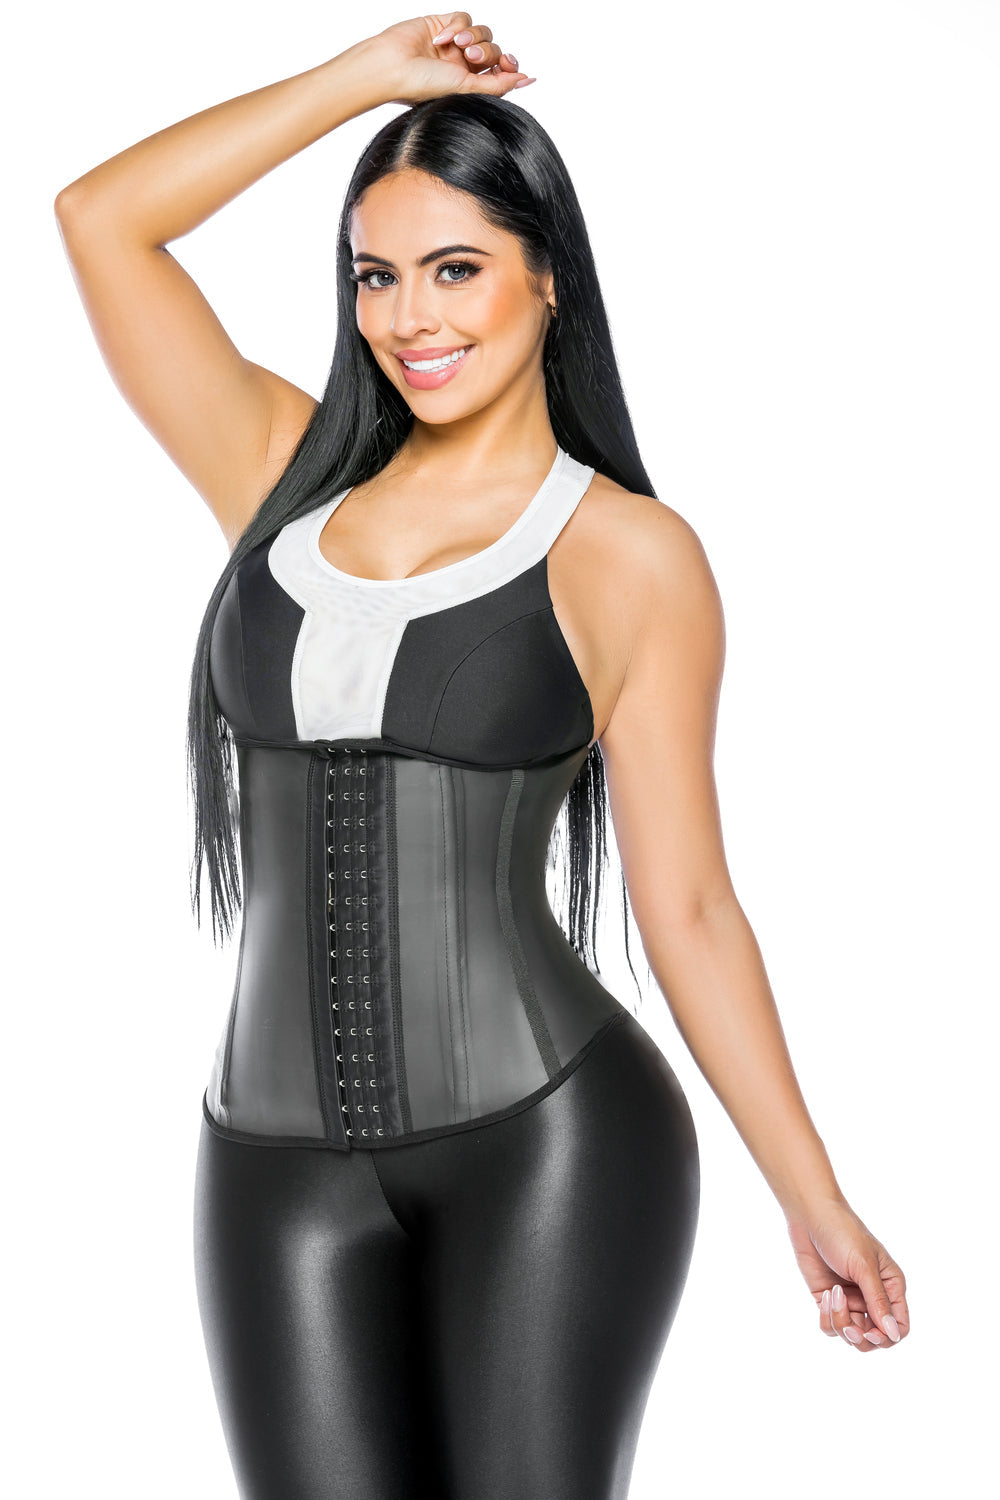 Black waist trainer specially designed to define your curves. The